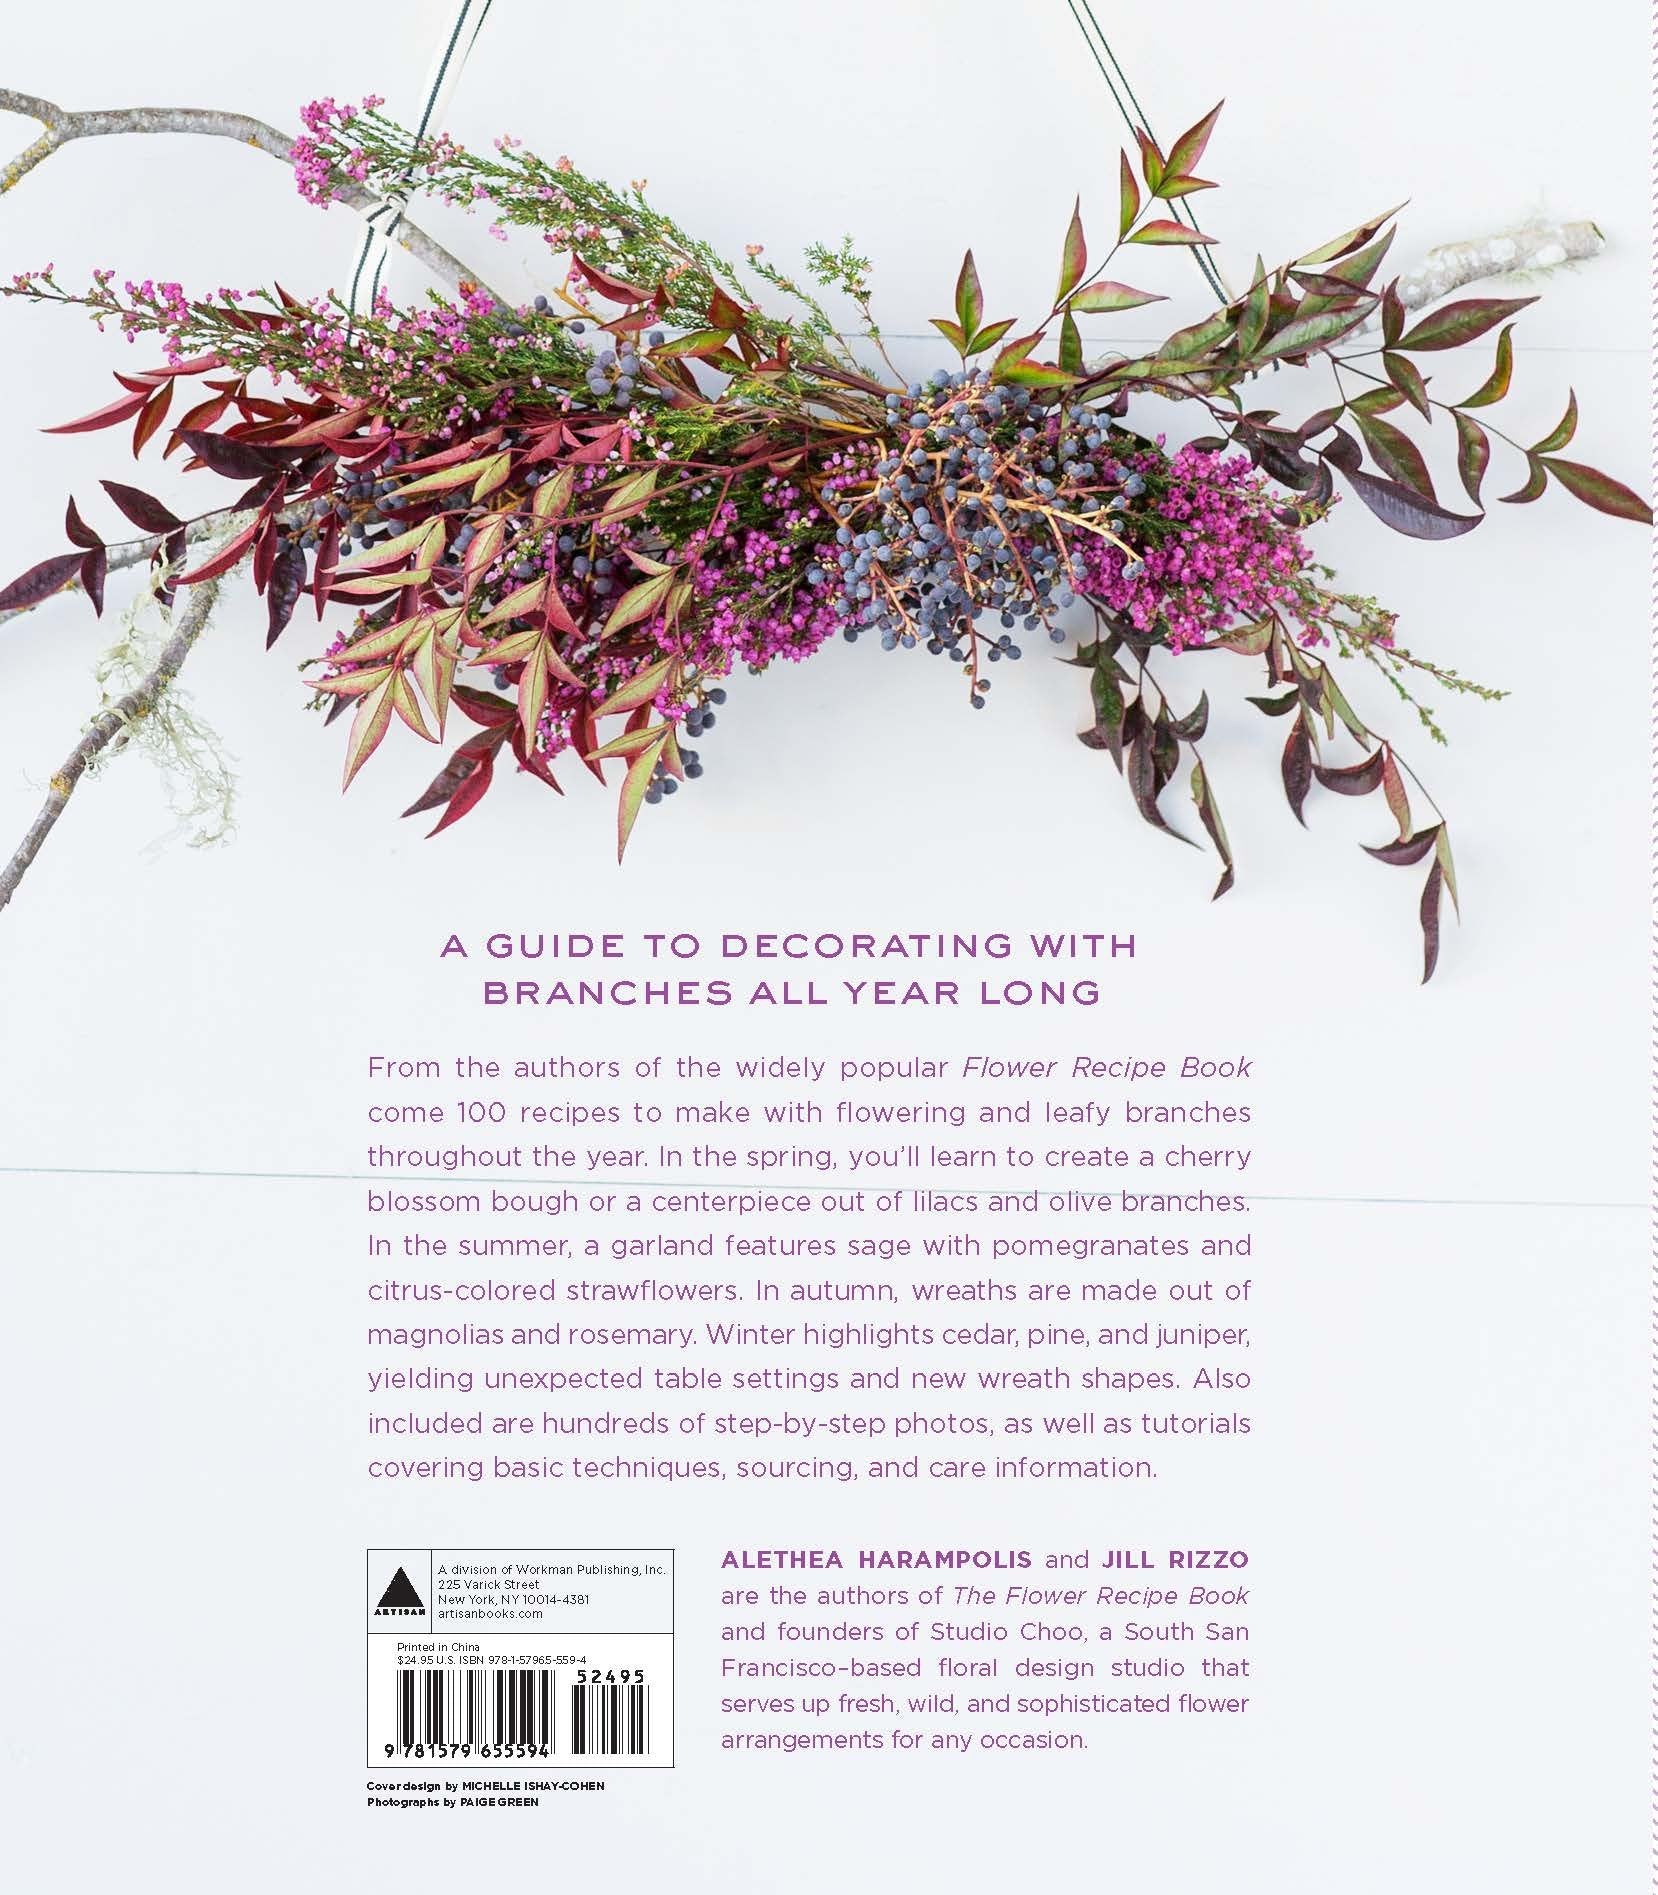 The Wreath Recipe Book: Year-Round Wreaths, Swags, and Other Decorations to Make with Seasonal Branches (Jill Rizzo)